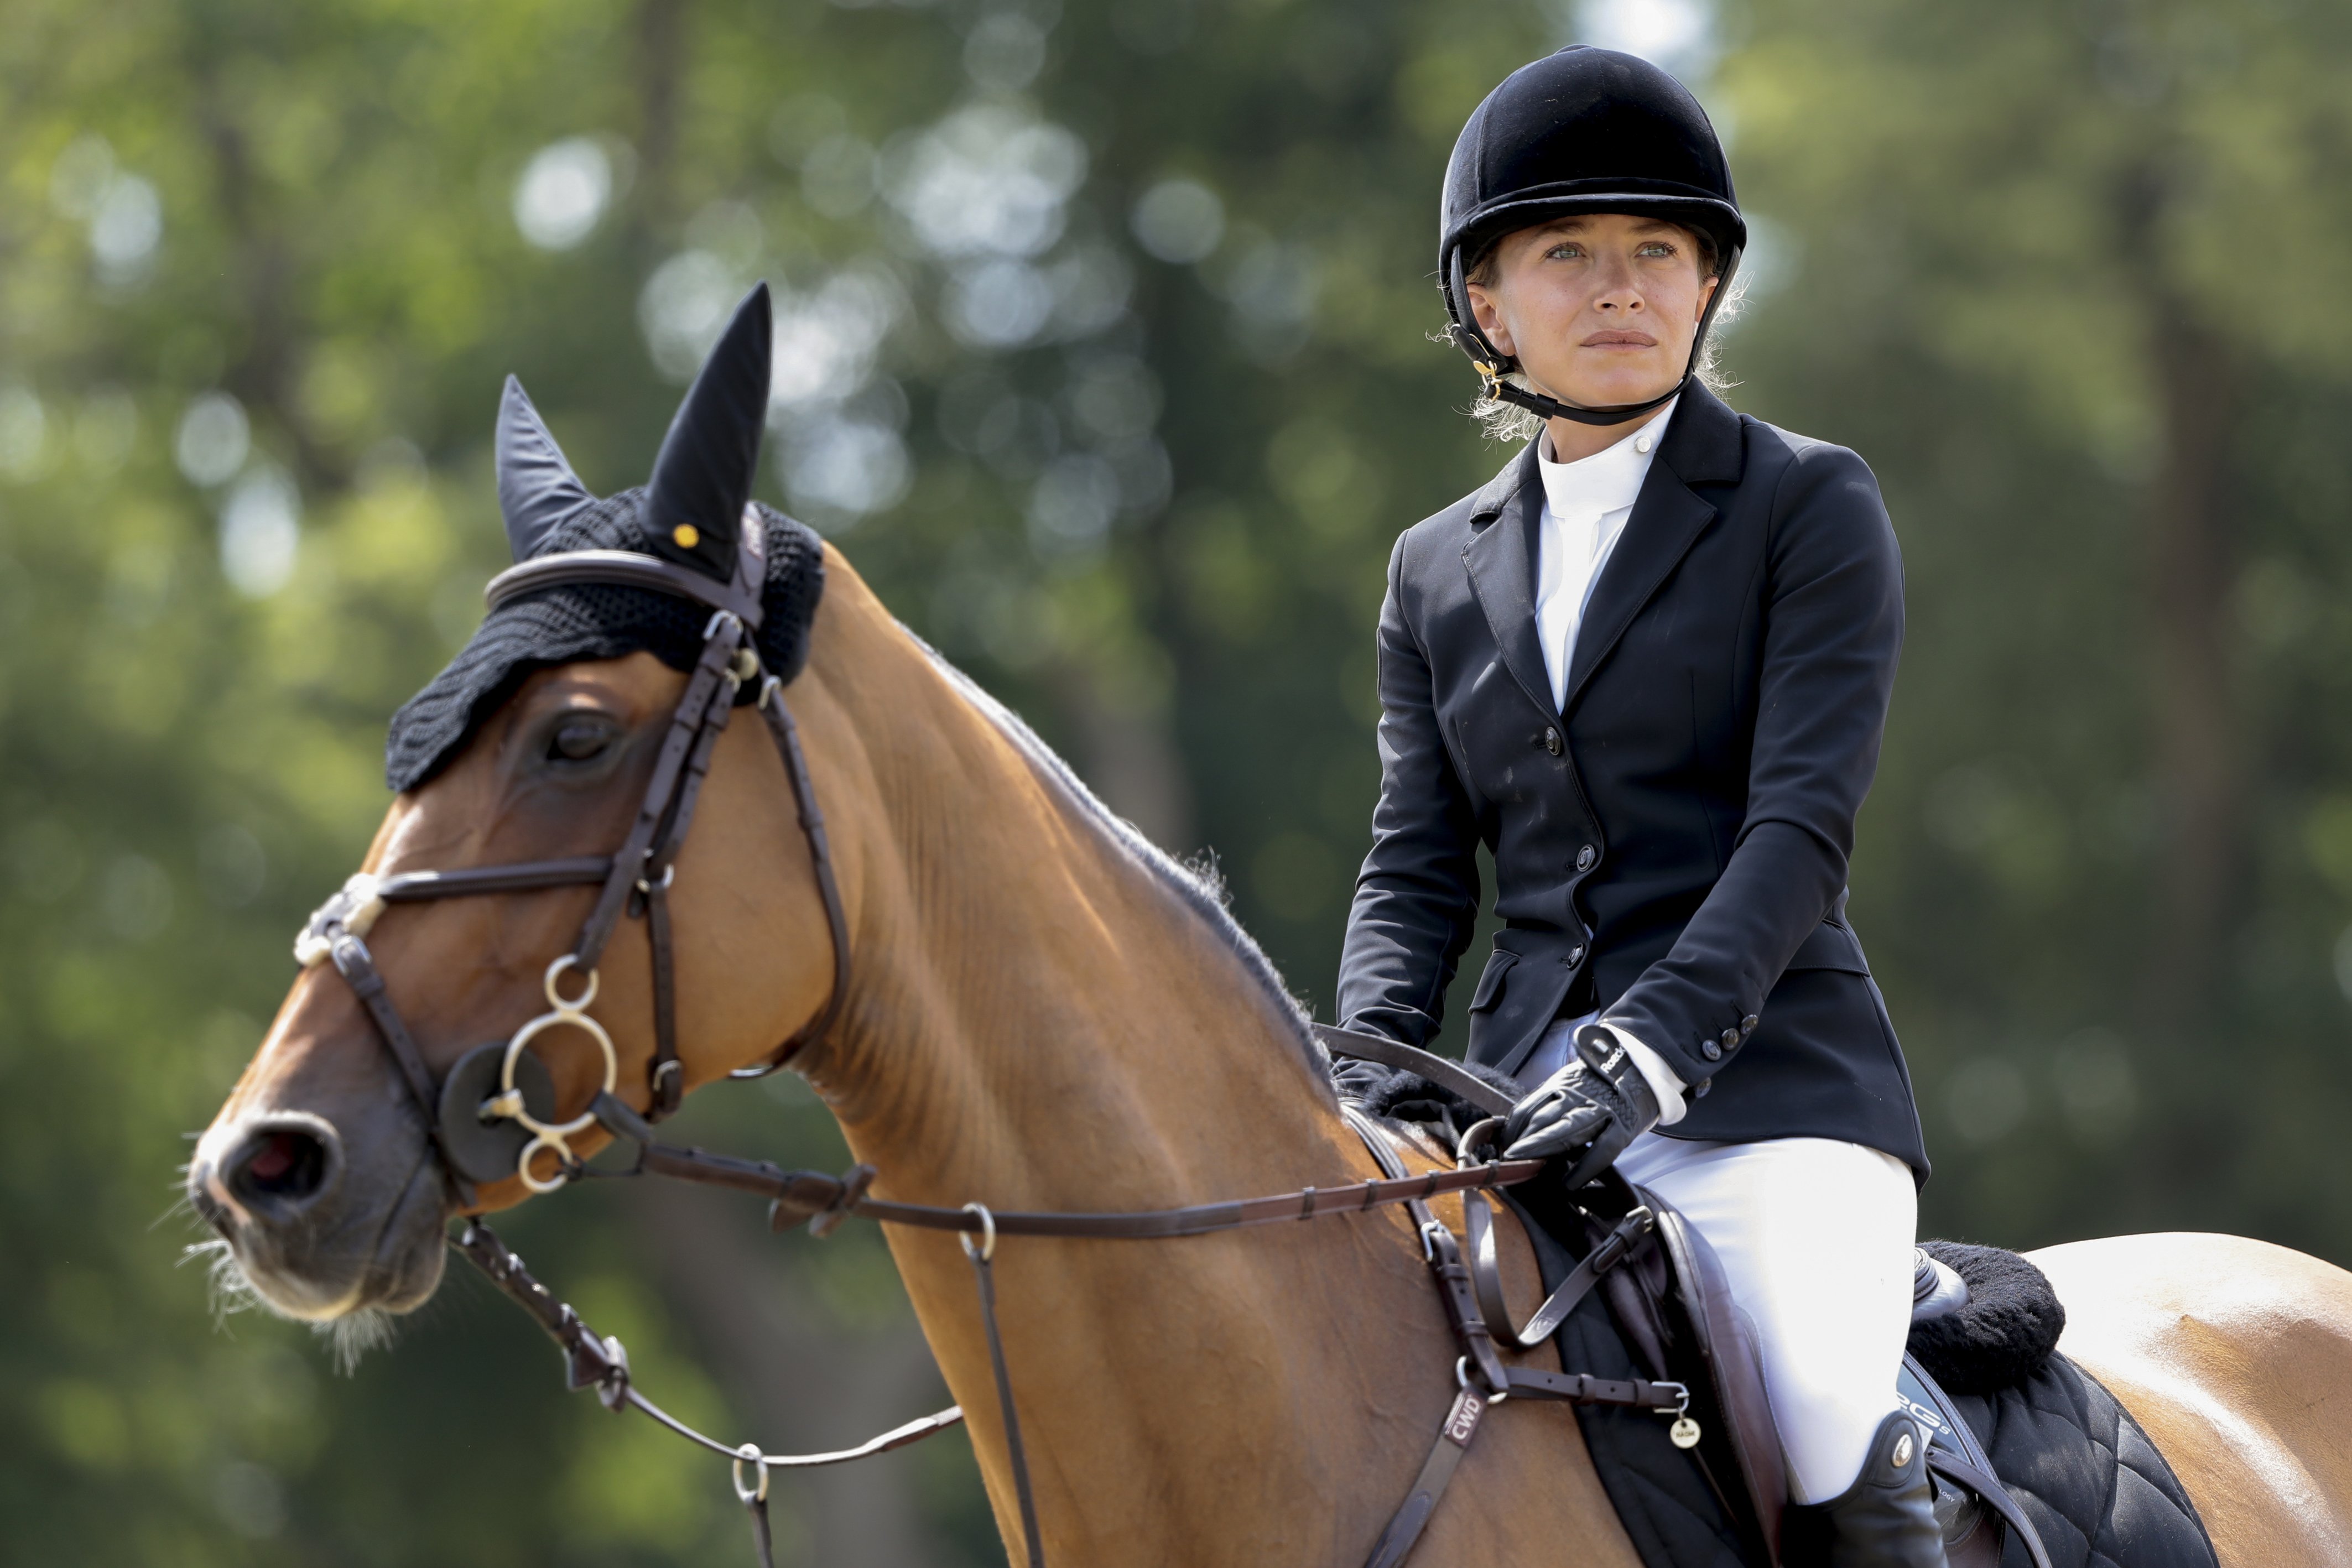 Mary Kate Olsen competing during the Longines Global Champions Tour of Chantilly, at Hippodrome de Chantilly on July 13, 2019 in Chantilly, France. / Source: Getty Images